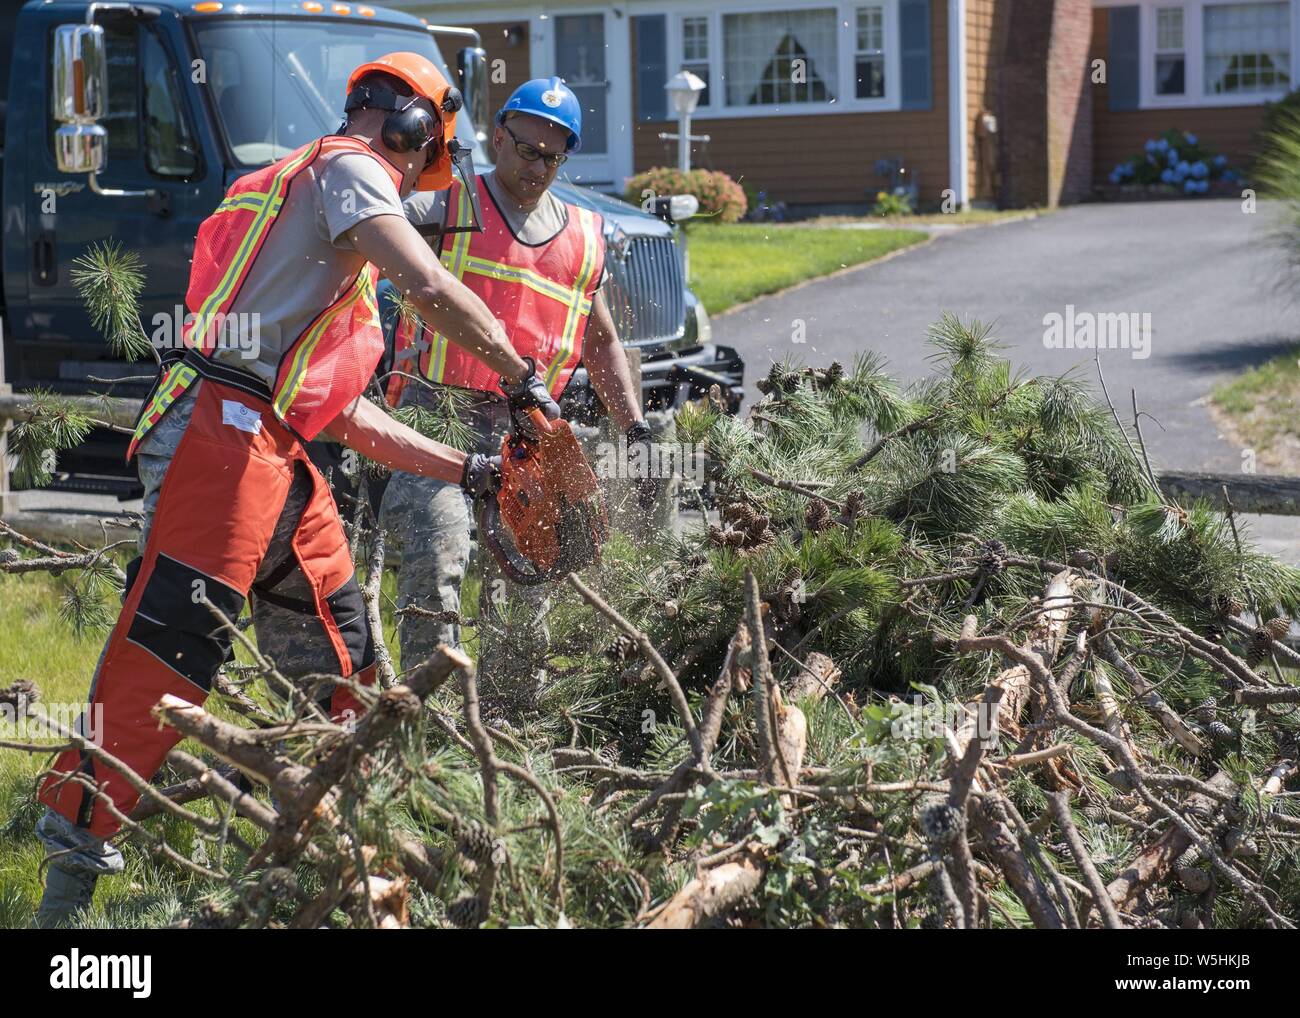 Airmen from the Massachusetts Air National Guard's 102nd Civil Engineer Squadron mobilized to support recovery efforts in the wake of two tornadoes that touched down on Cape Cod on July 23, 2019, July 25, 2019. The Airmen cleared fallen trees and debris from roadways in the towns of Dennis and Harwich Massachusetts. Image courtesy Tech. Sgt. Thomas Swanson/102nd Intelligence Wing. () Stock Photo